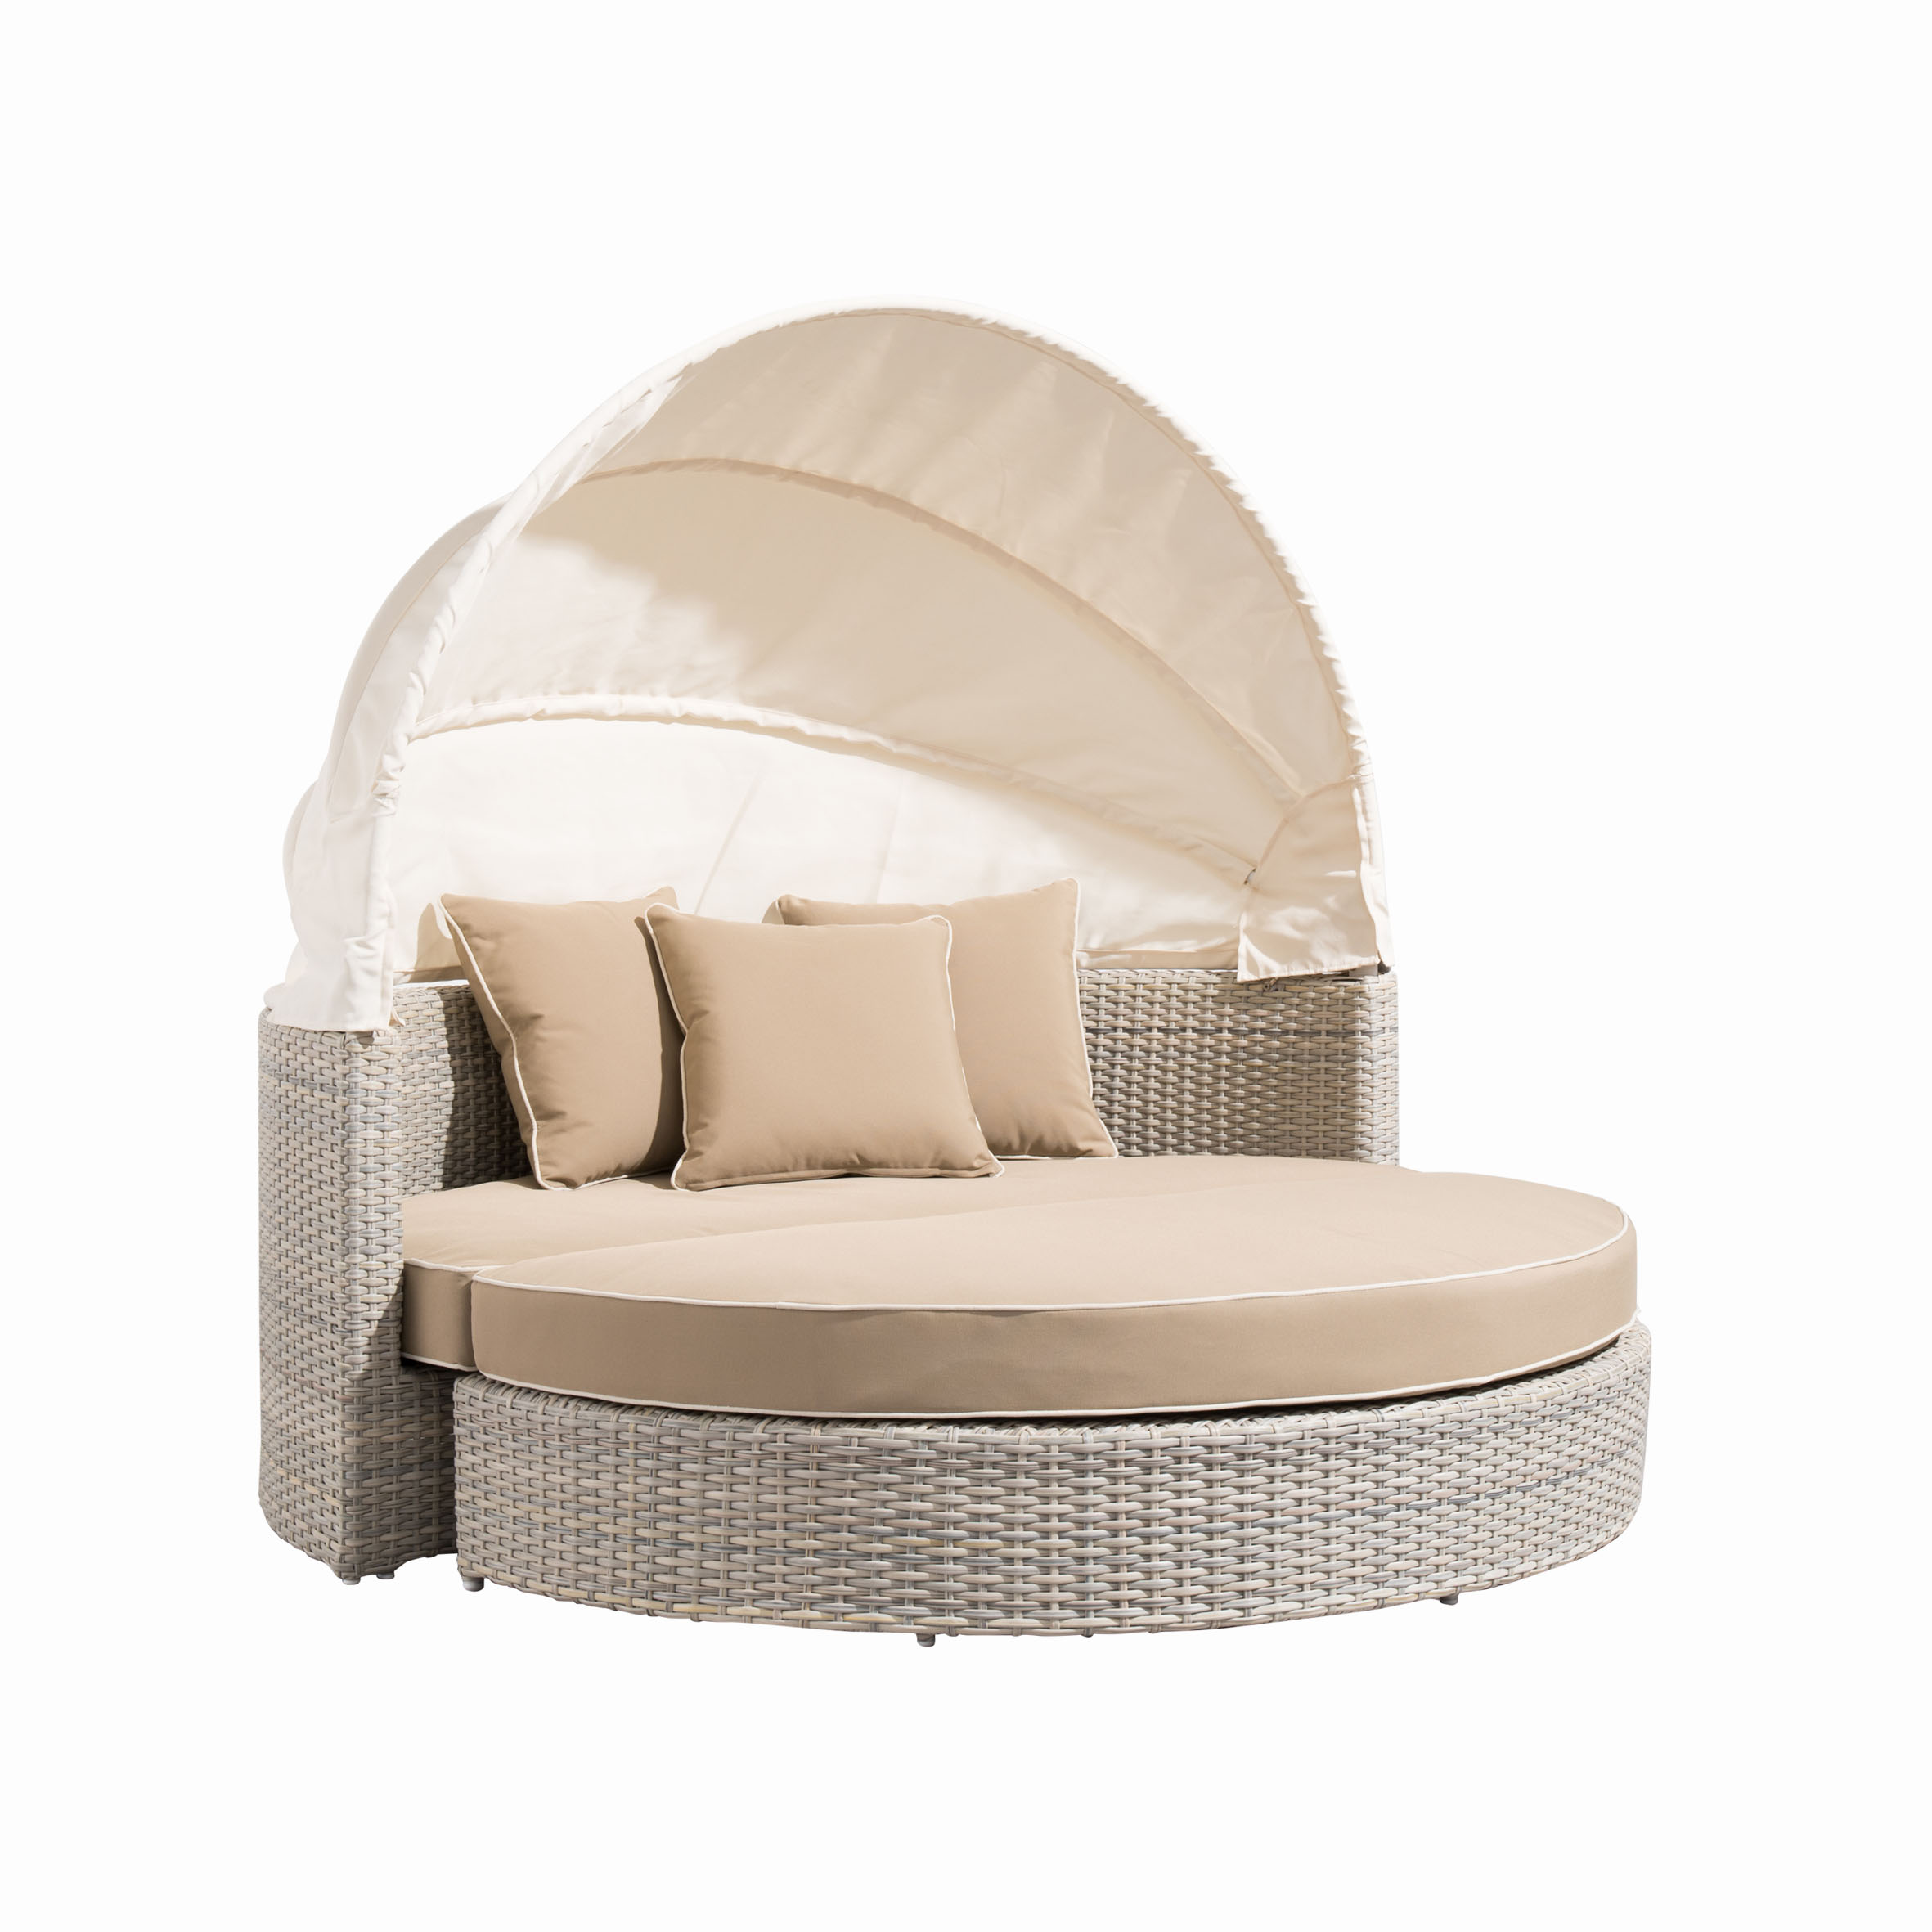 Ideal rattan round daybed S3